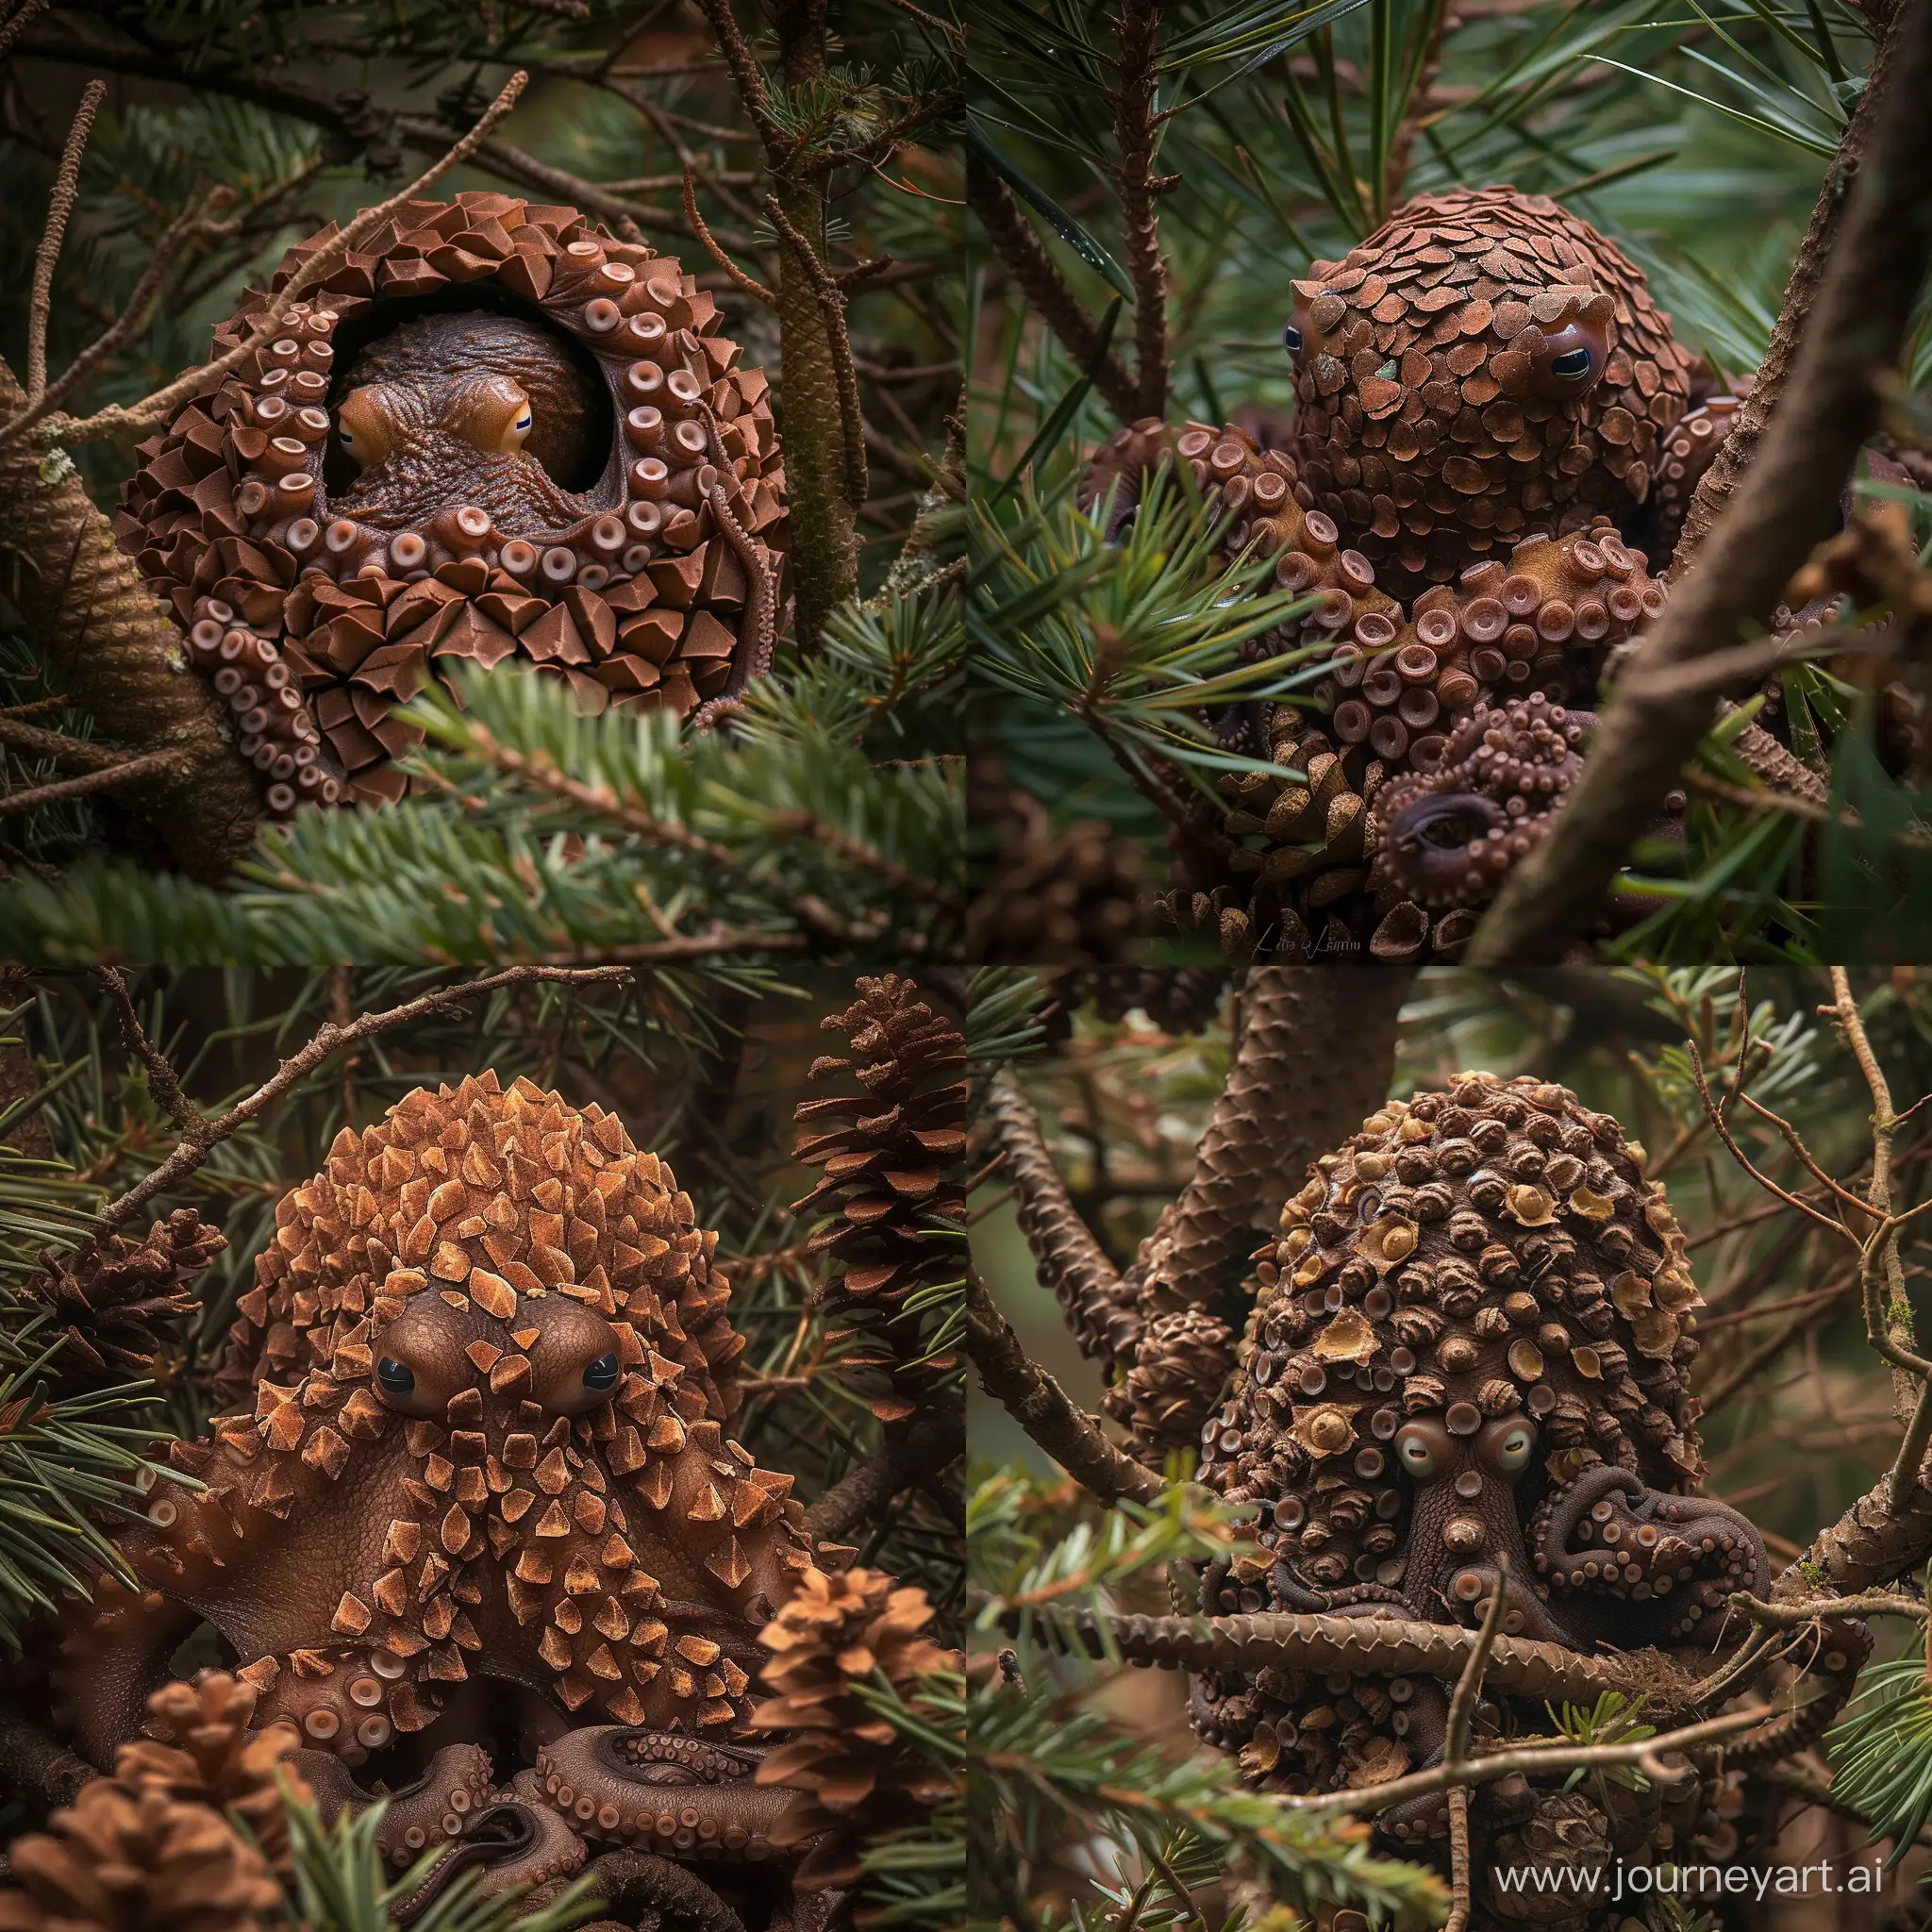 detailed crisp sharp award winning wildlife photo of a medium sized mottled brown octopus covered completely in pinecone scales similar to an armadillo, hiding in a pine tree, it looks exactly like a pinecone but only the eyes are visible, suckers are not visible, dense foliage with pinecones, temperate pine rainforest, bright daylight, telephoto lens, canon camera, wide shot with branches and context, good composition, Frans Lanting